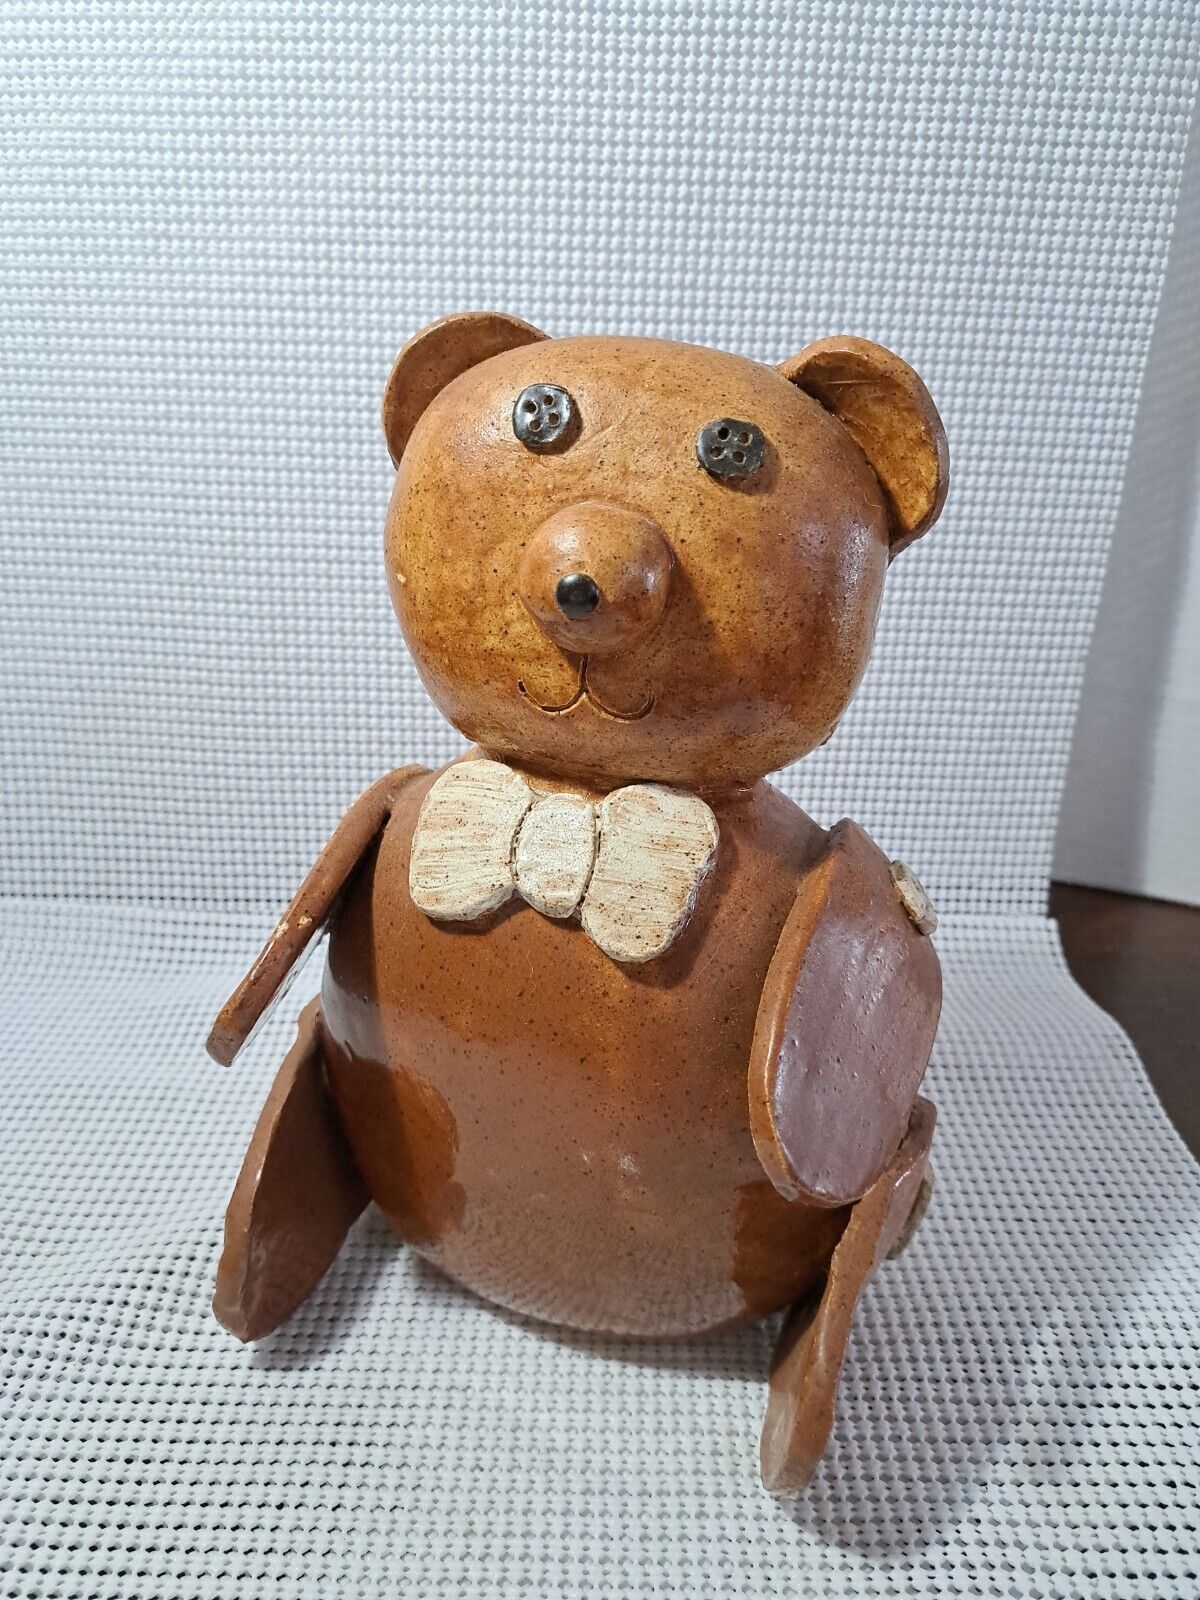 Vintage Handmade Ceramic Bear With Bow Tie & Button Eyes Figurine Hand Painted